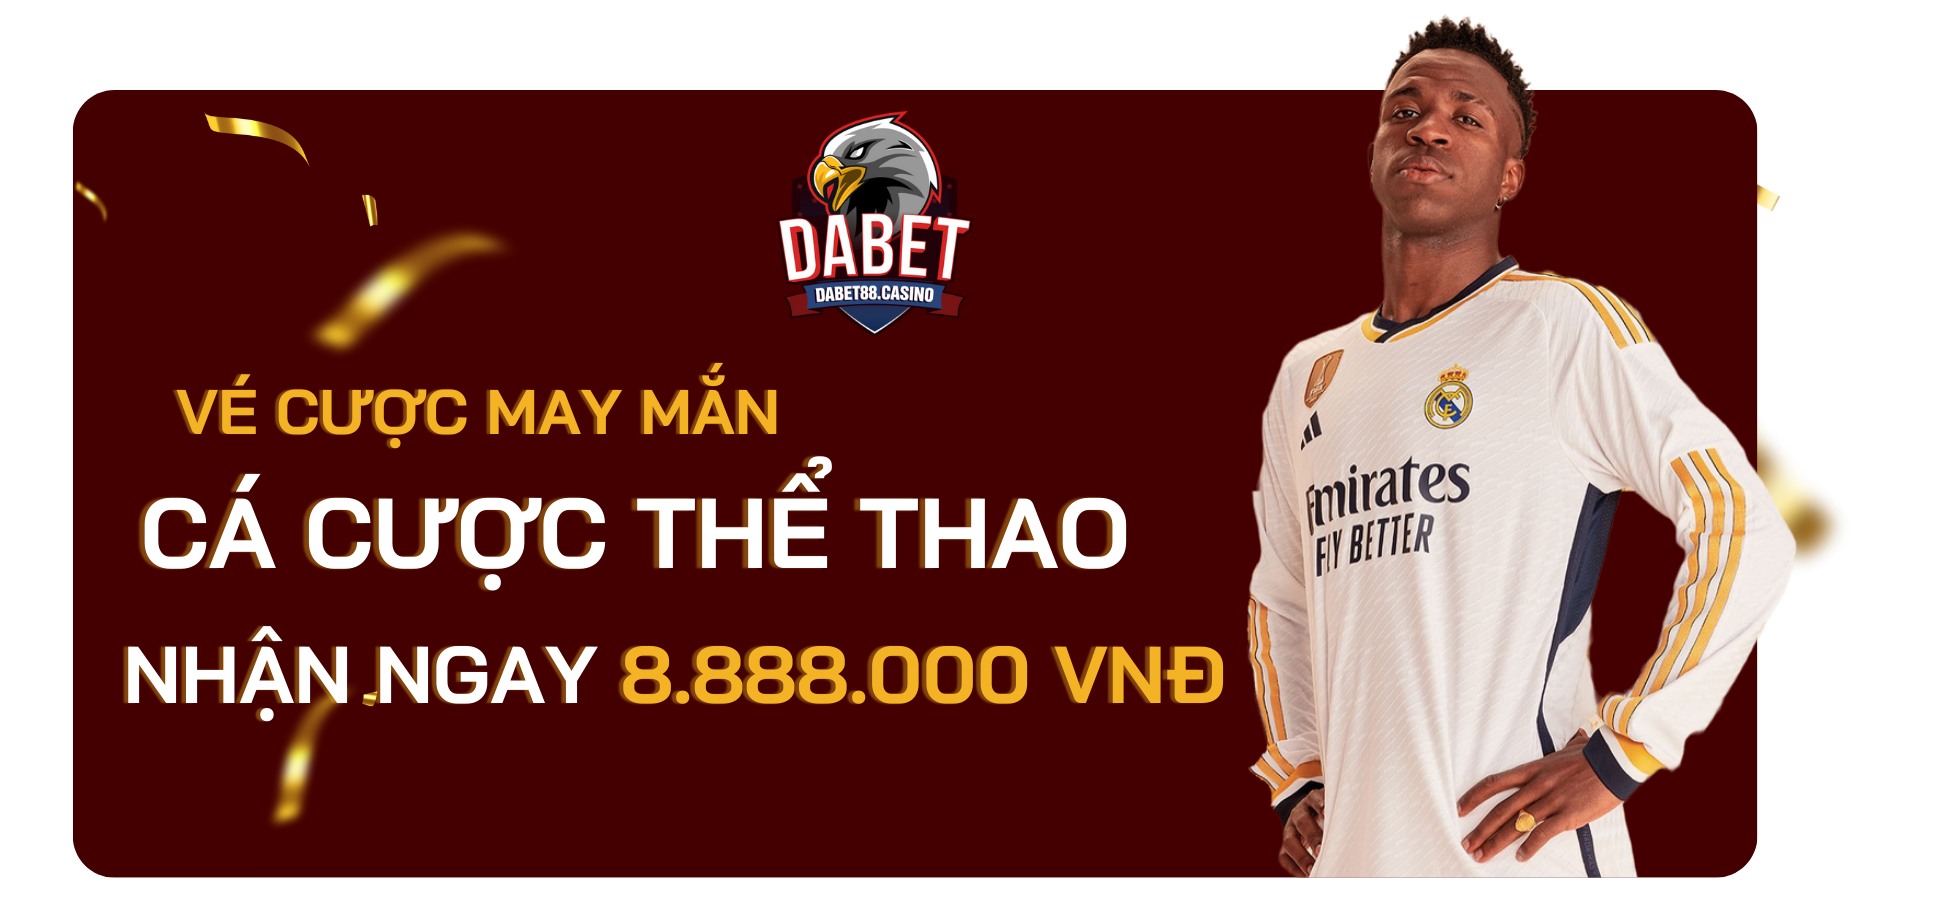 banner thể thao dabet